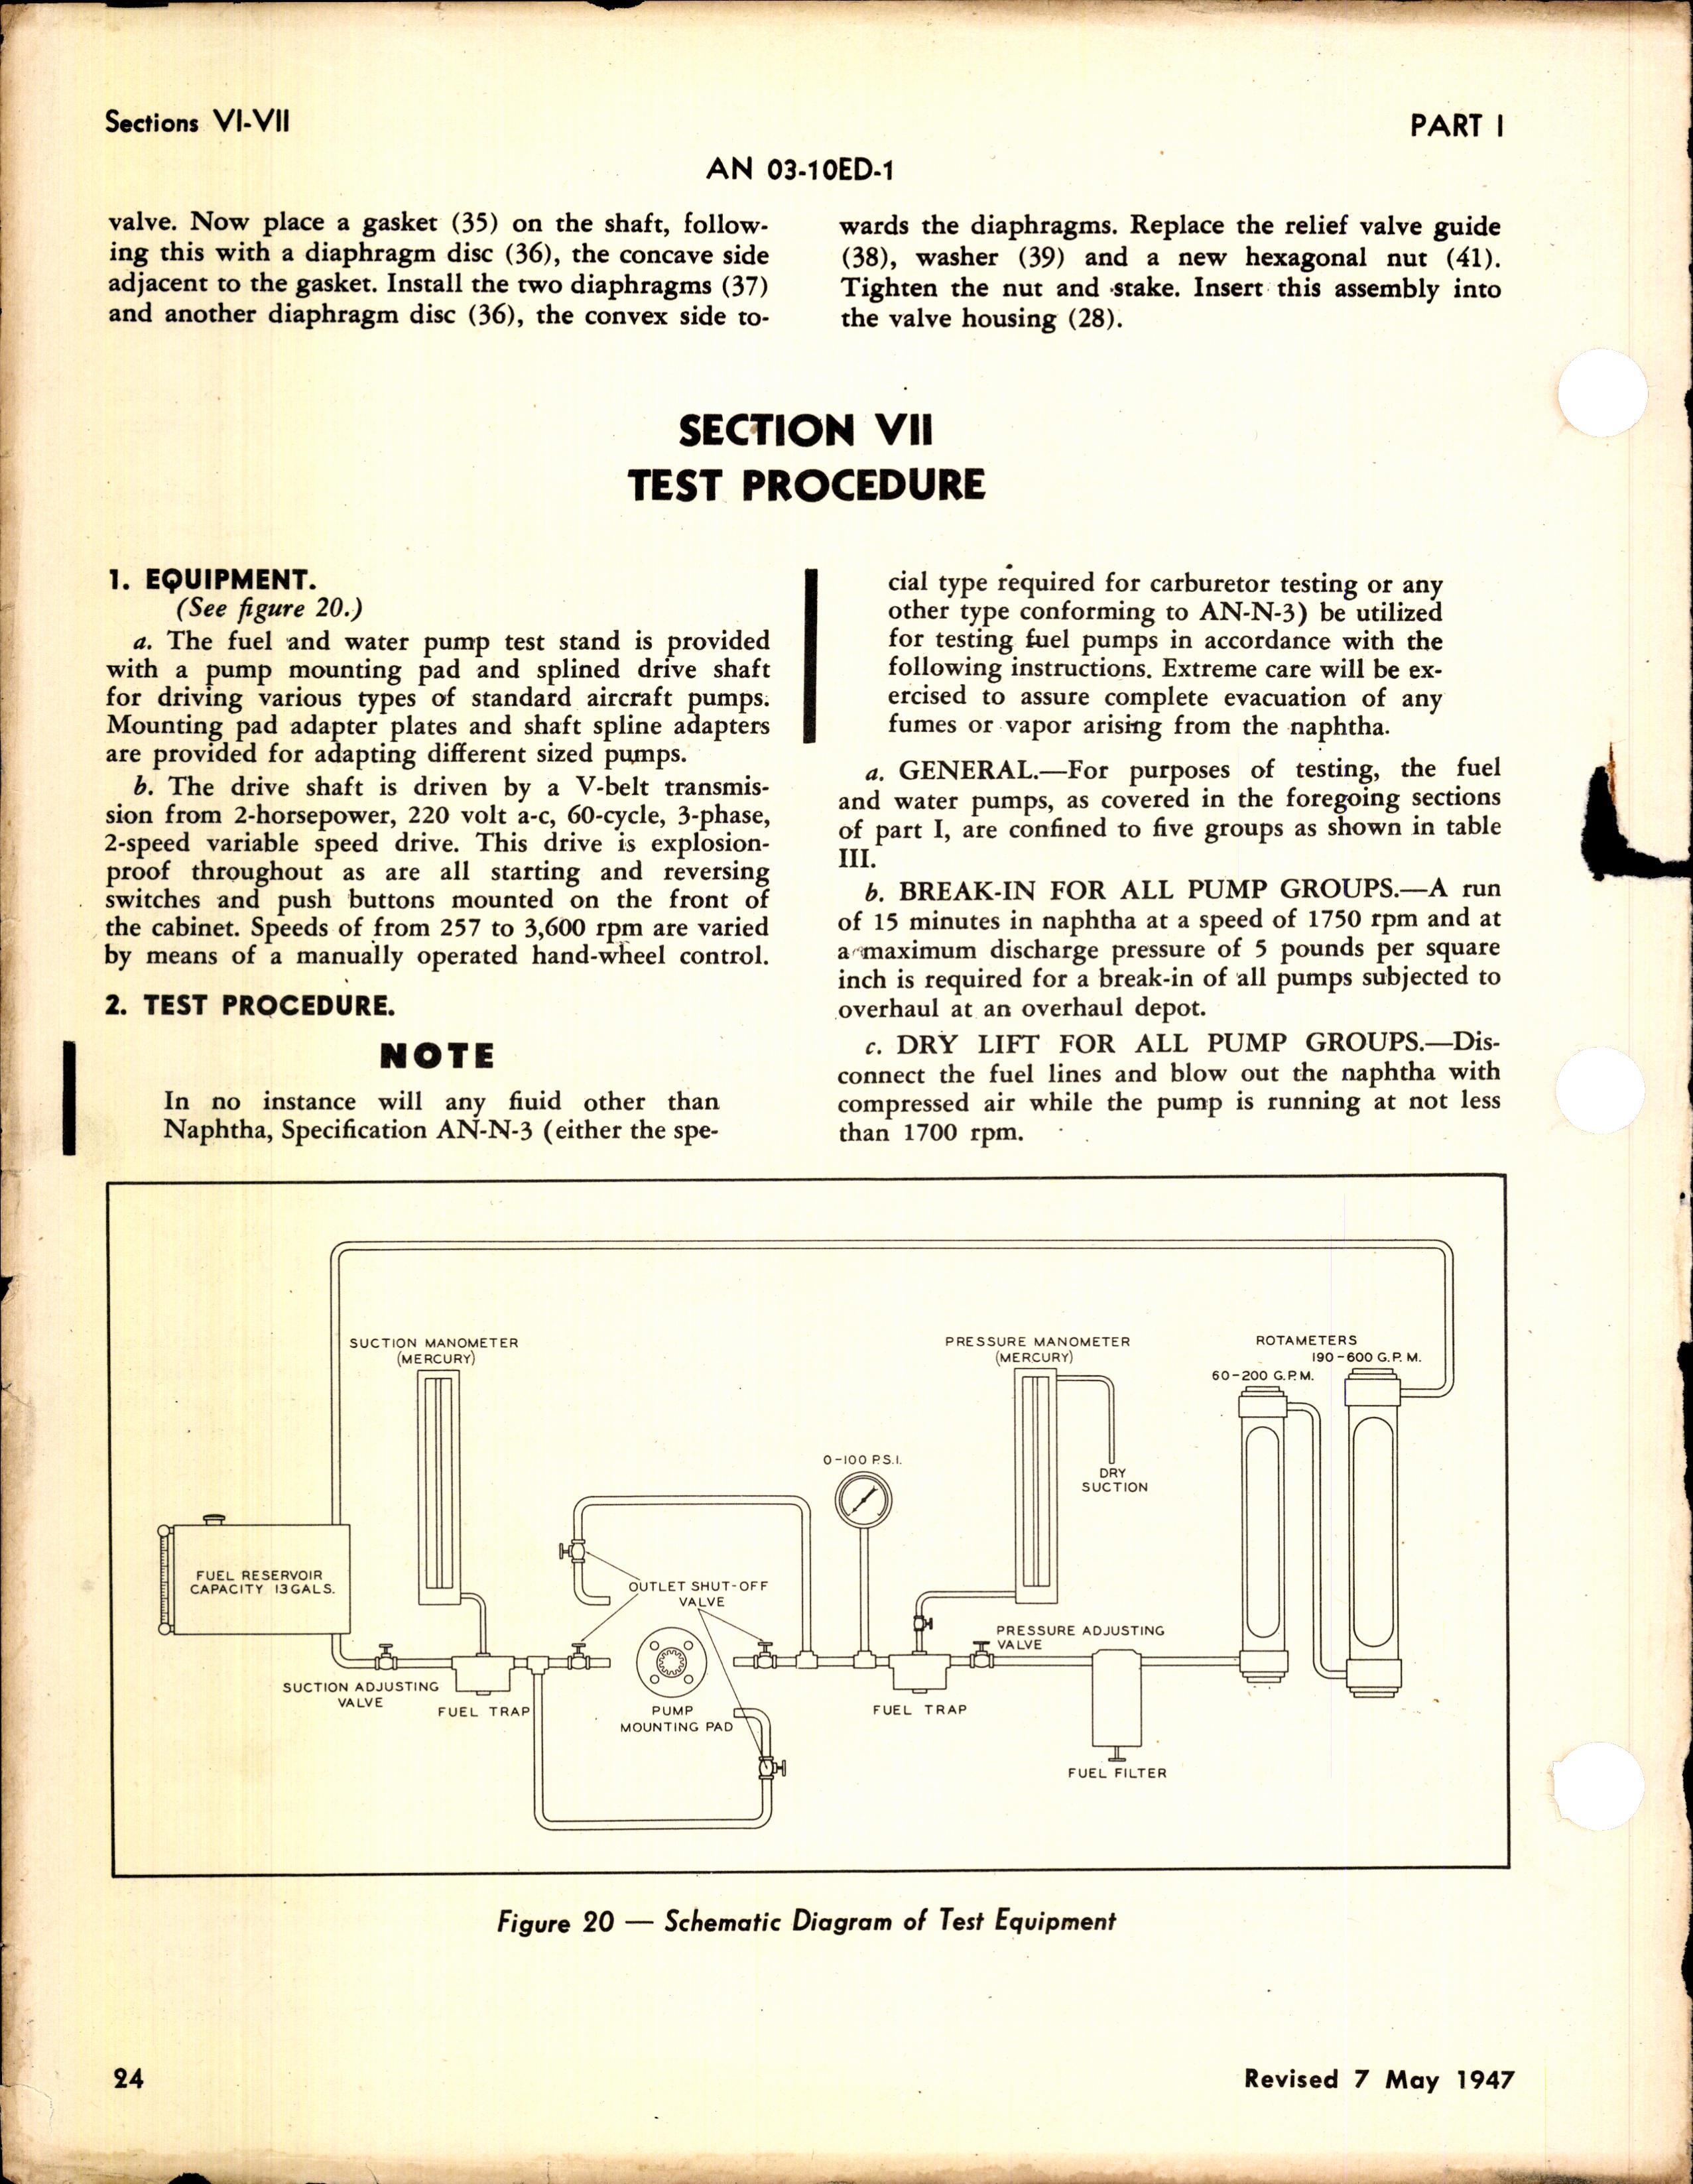 Sample page 4 from AirCorps Library document: Operation, Service, & Overhaul Instructions with Parts Catalog for Fuel and Water Pumps - Engine Driven